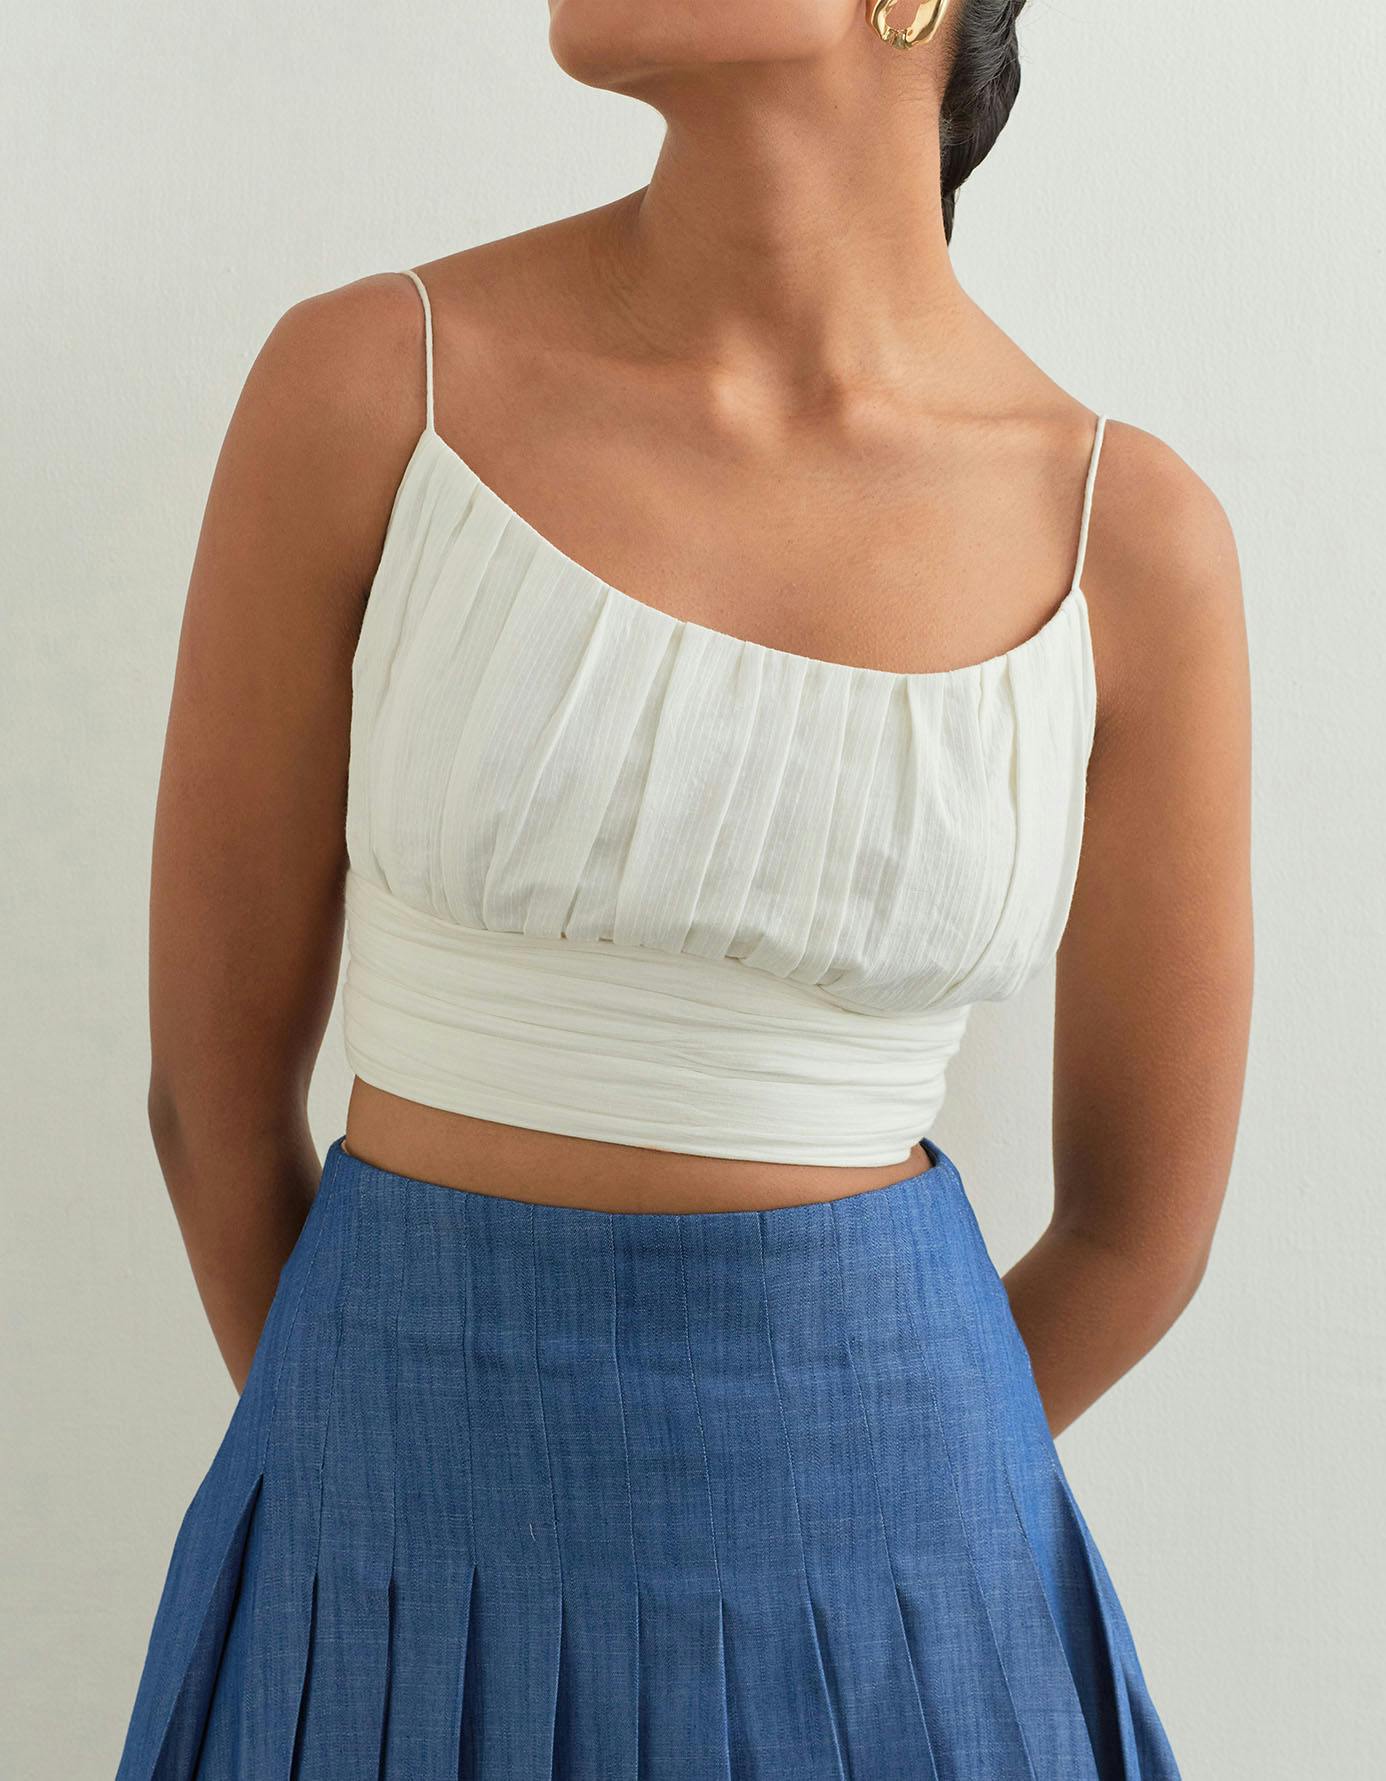 JENNIE TOP In White, a product by SIX BUTTONS DOWN